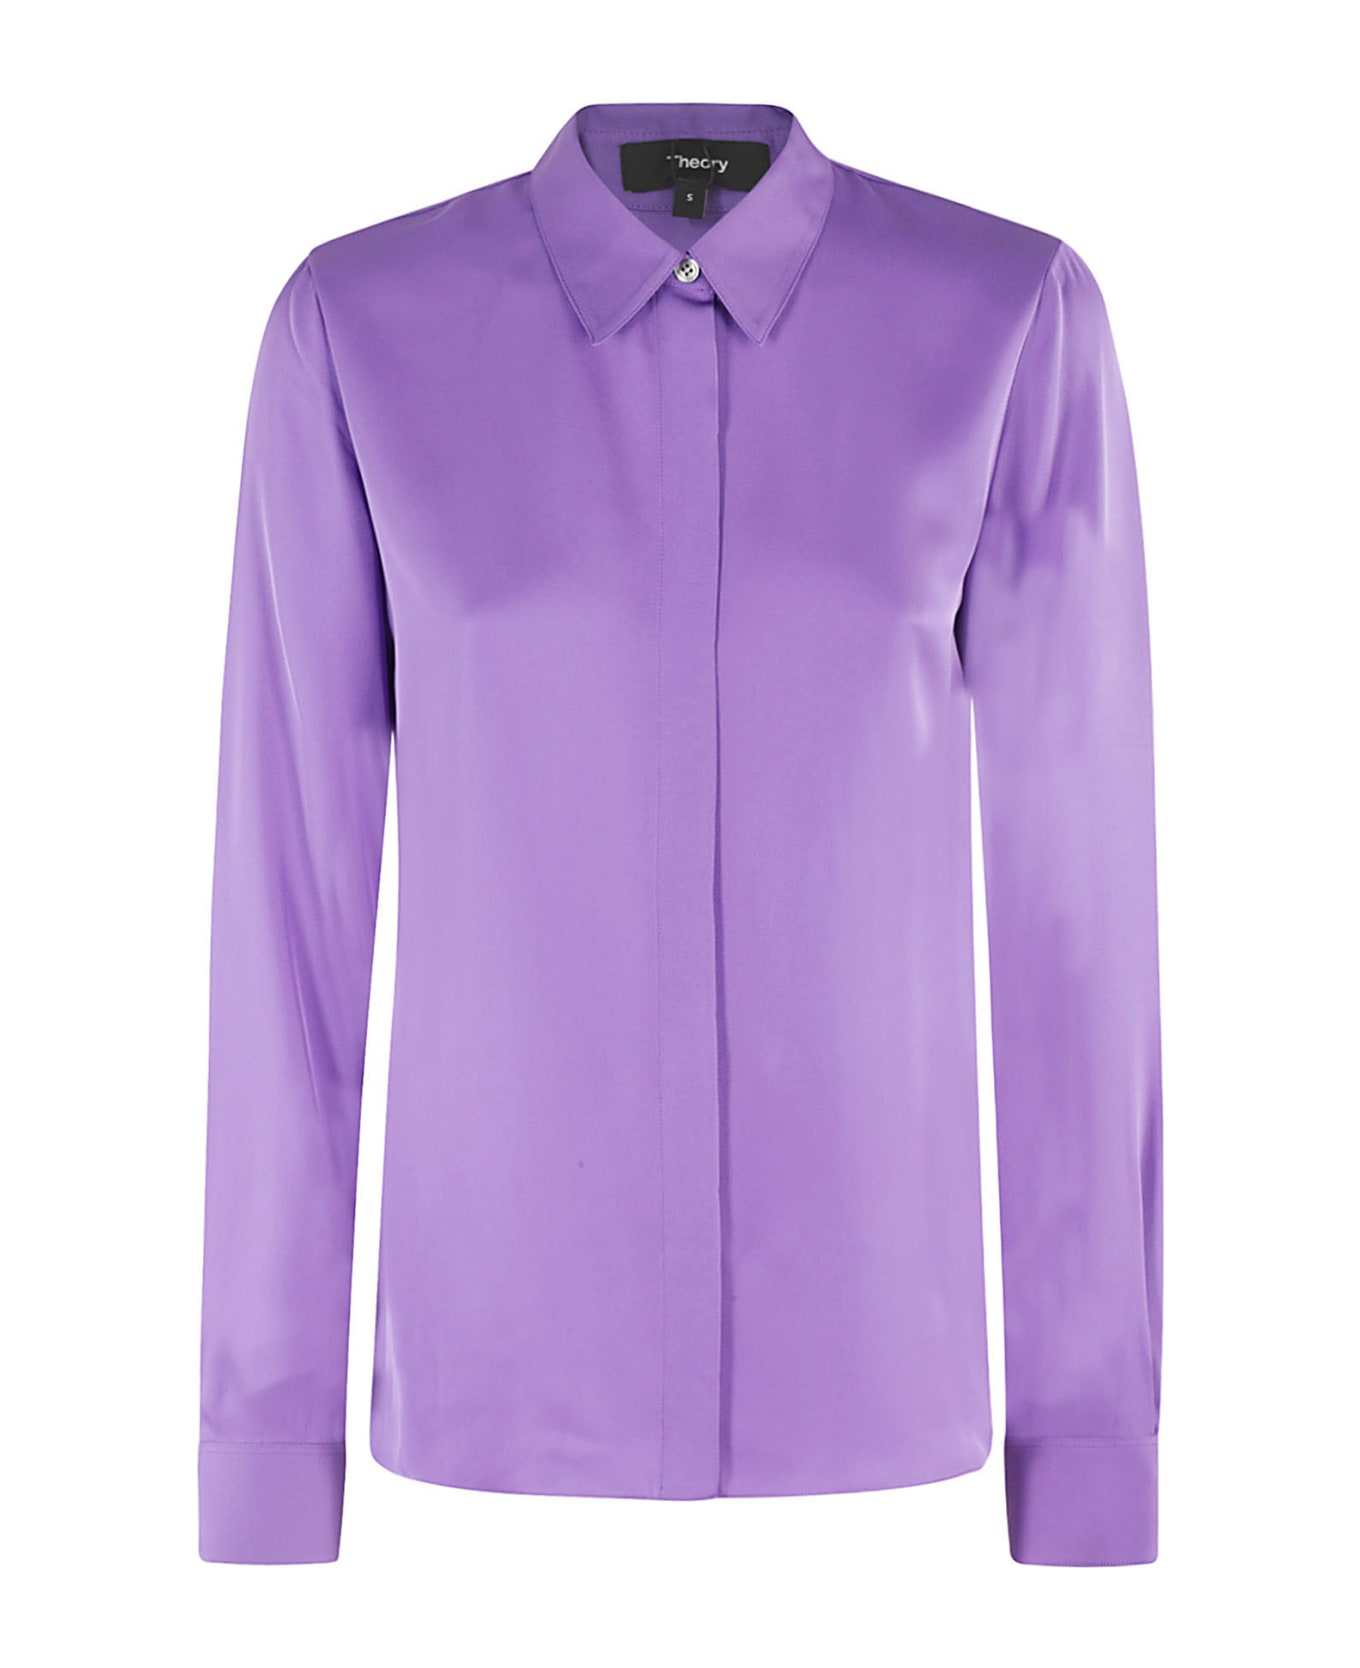 Theory Classic Fitted Shirt - Qy Bright Peony